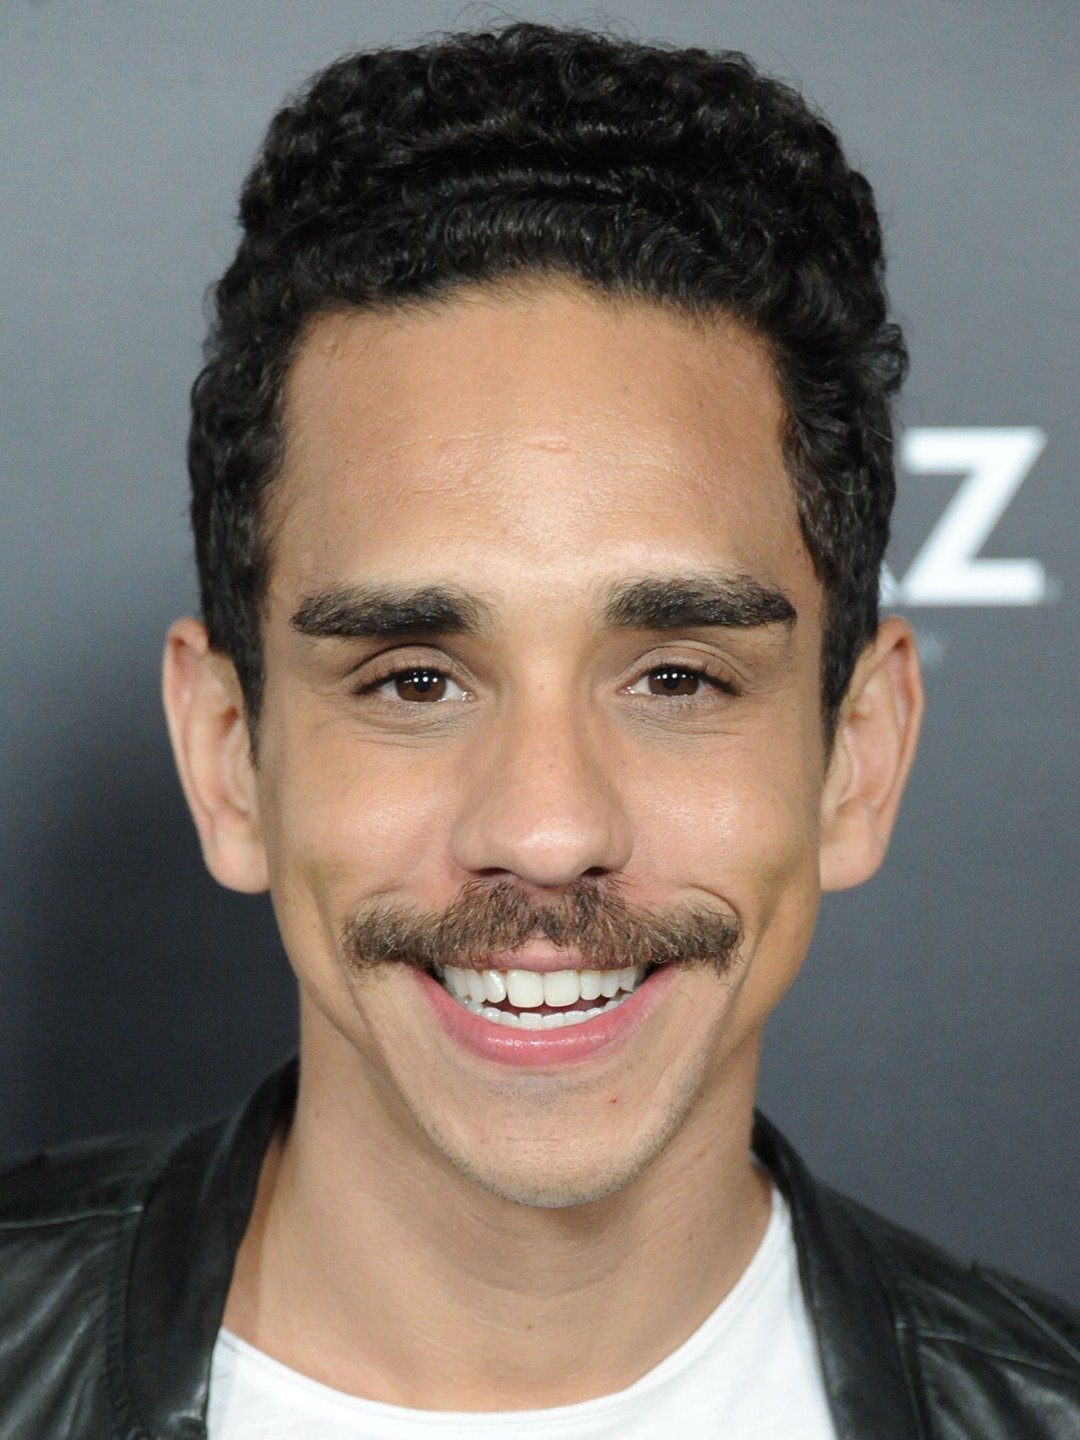 How tall is Ray Santiago?